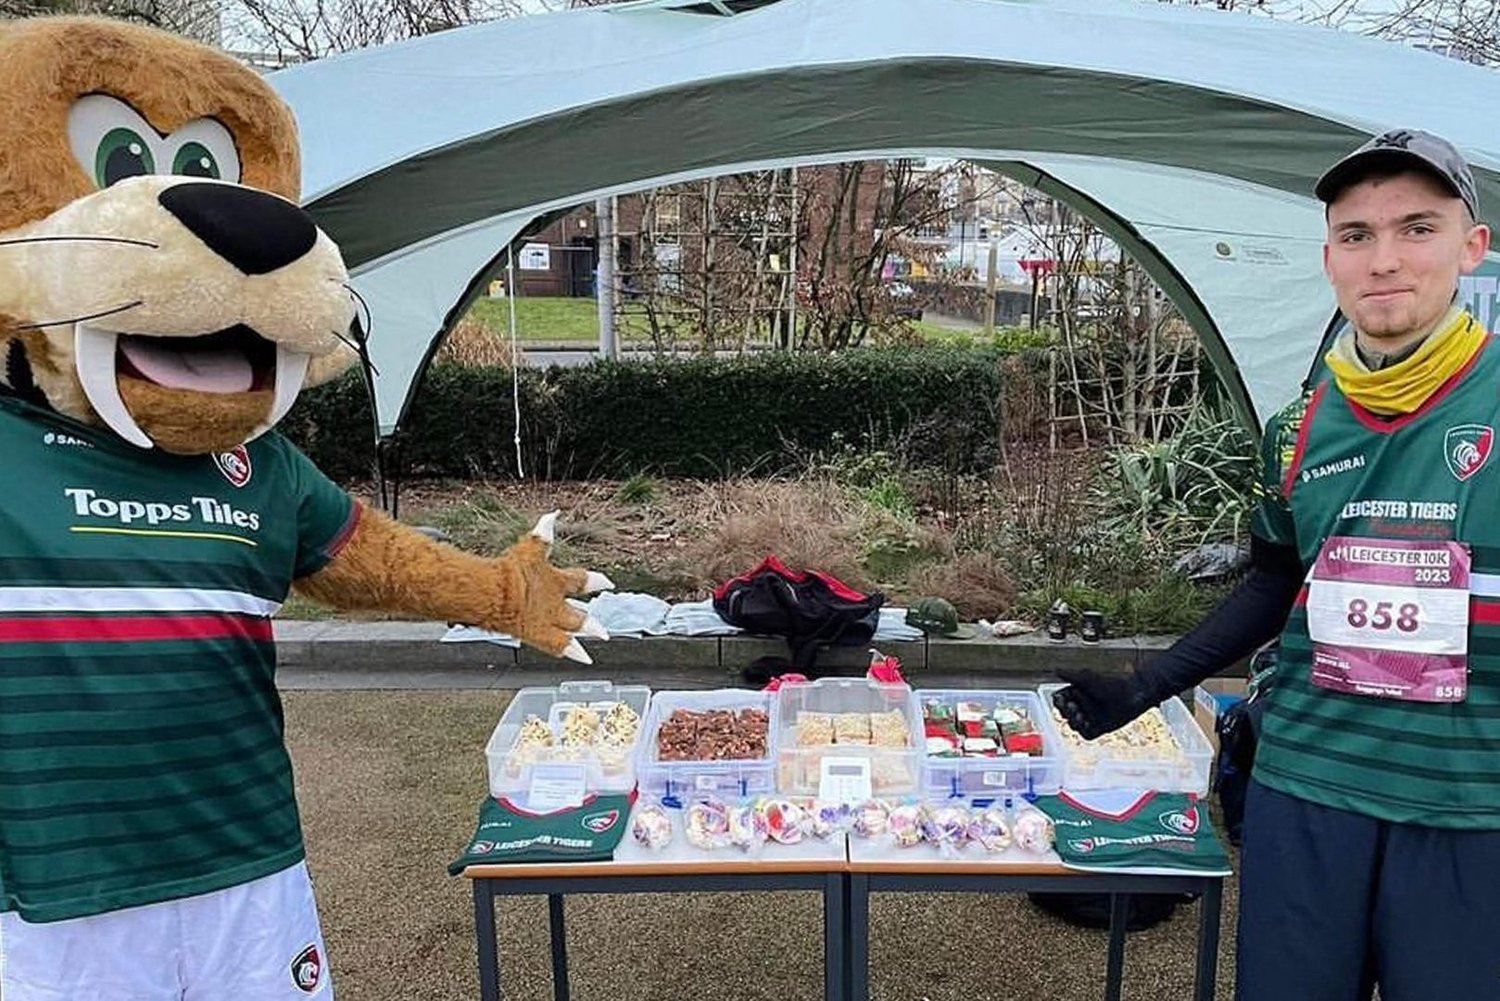 Leicester Tigers Foundation - Get Involved